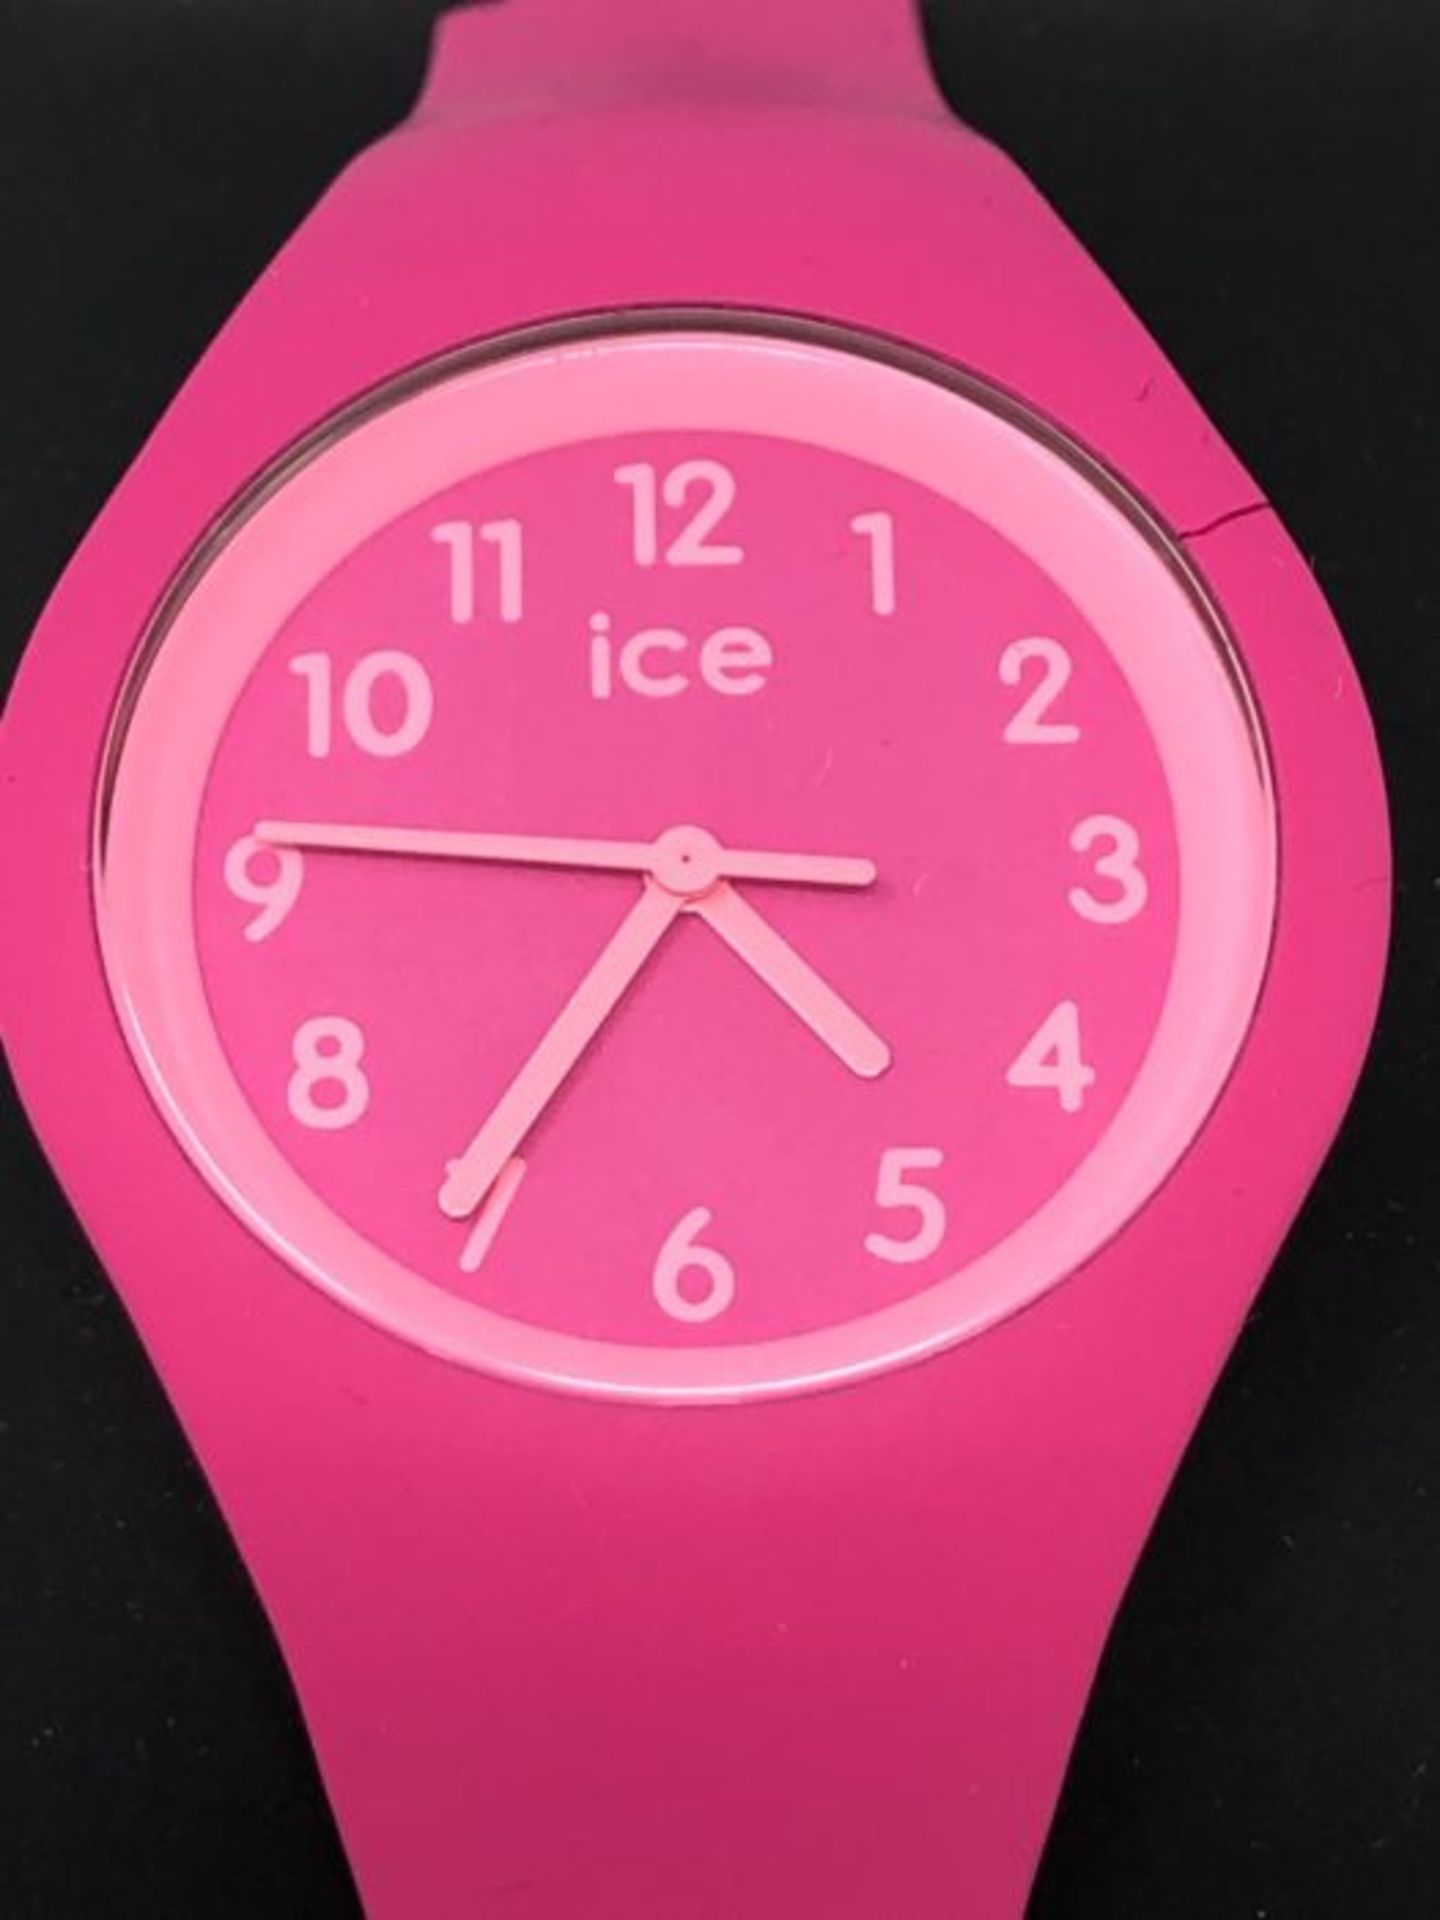 Ice-Watch - ICE Ola Kids Fairy tale - Girl's Wristwatch with Silicon Strap - 014430 (S - Image 3 of 3